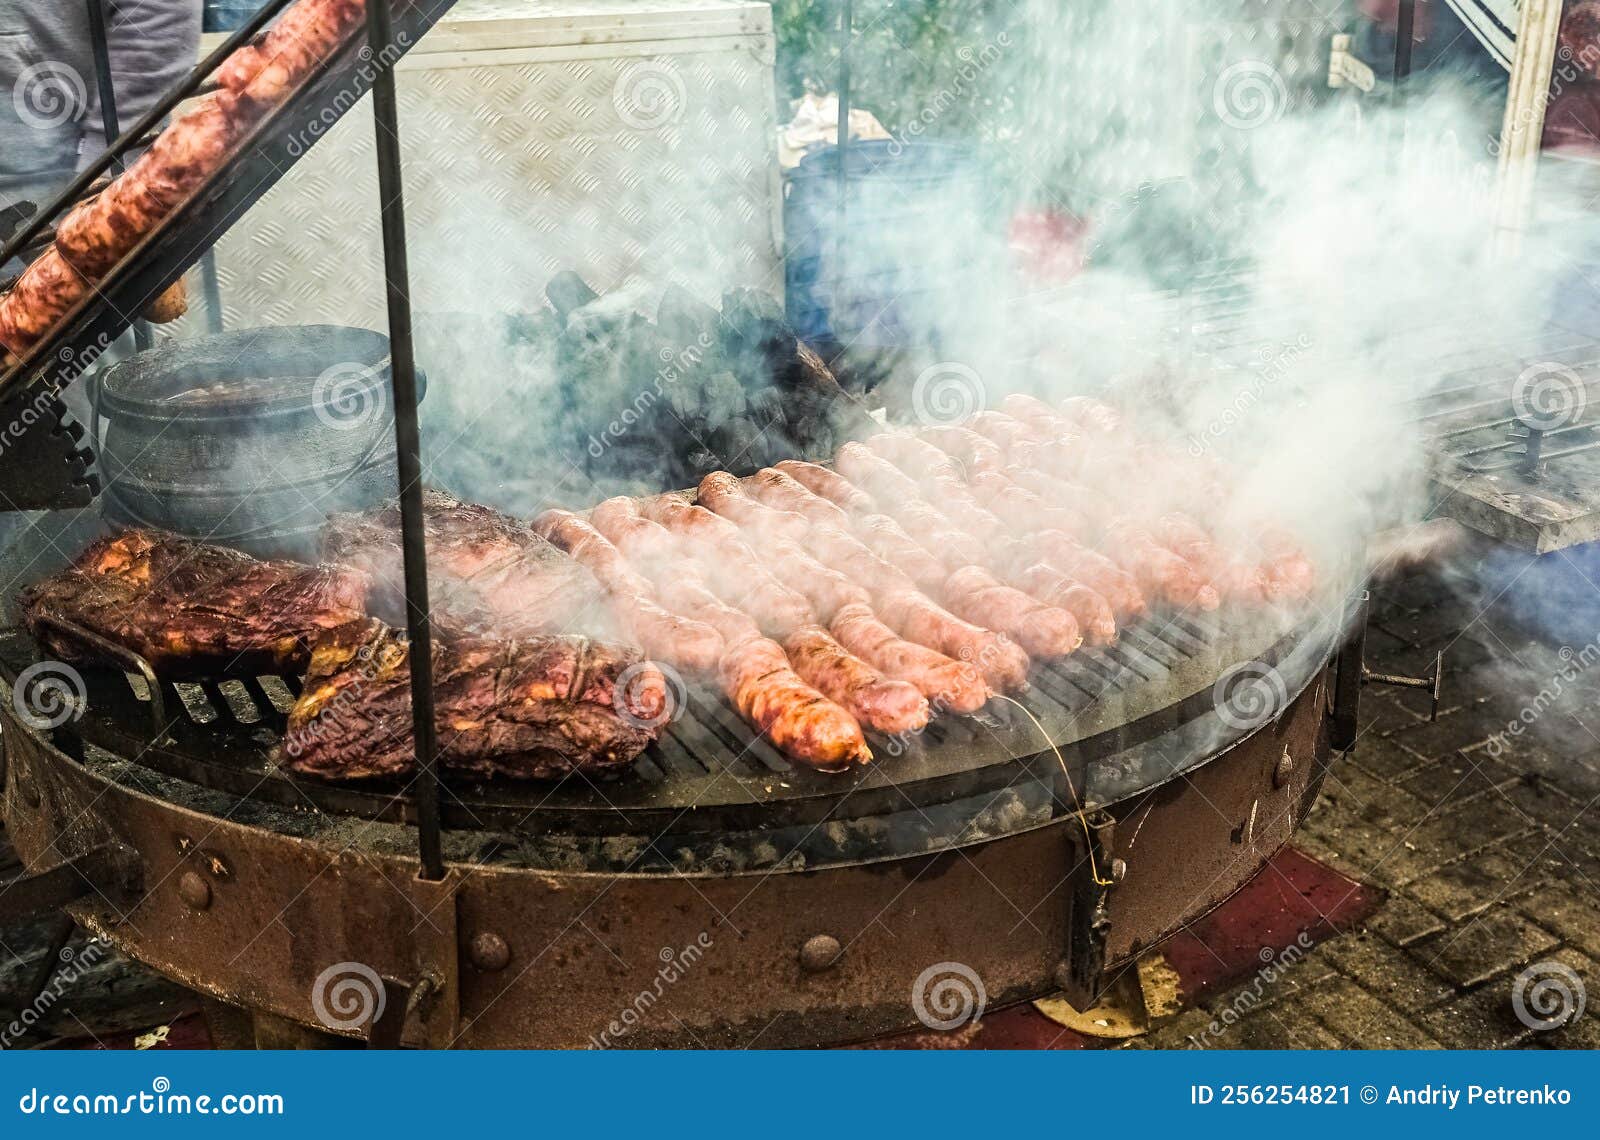 sausages on the grill, traditional argentinean food